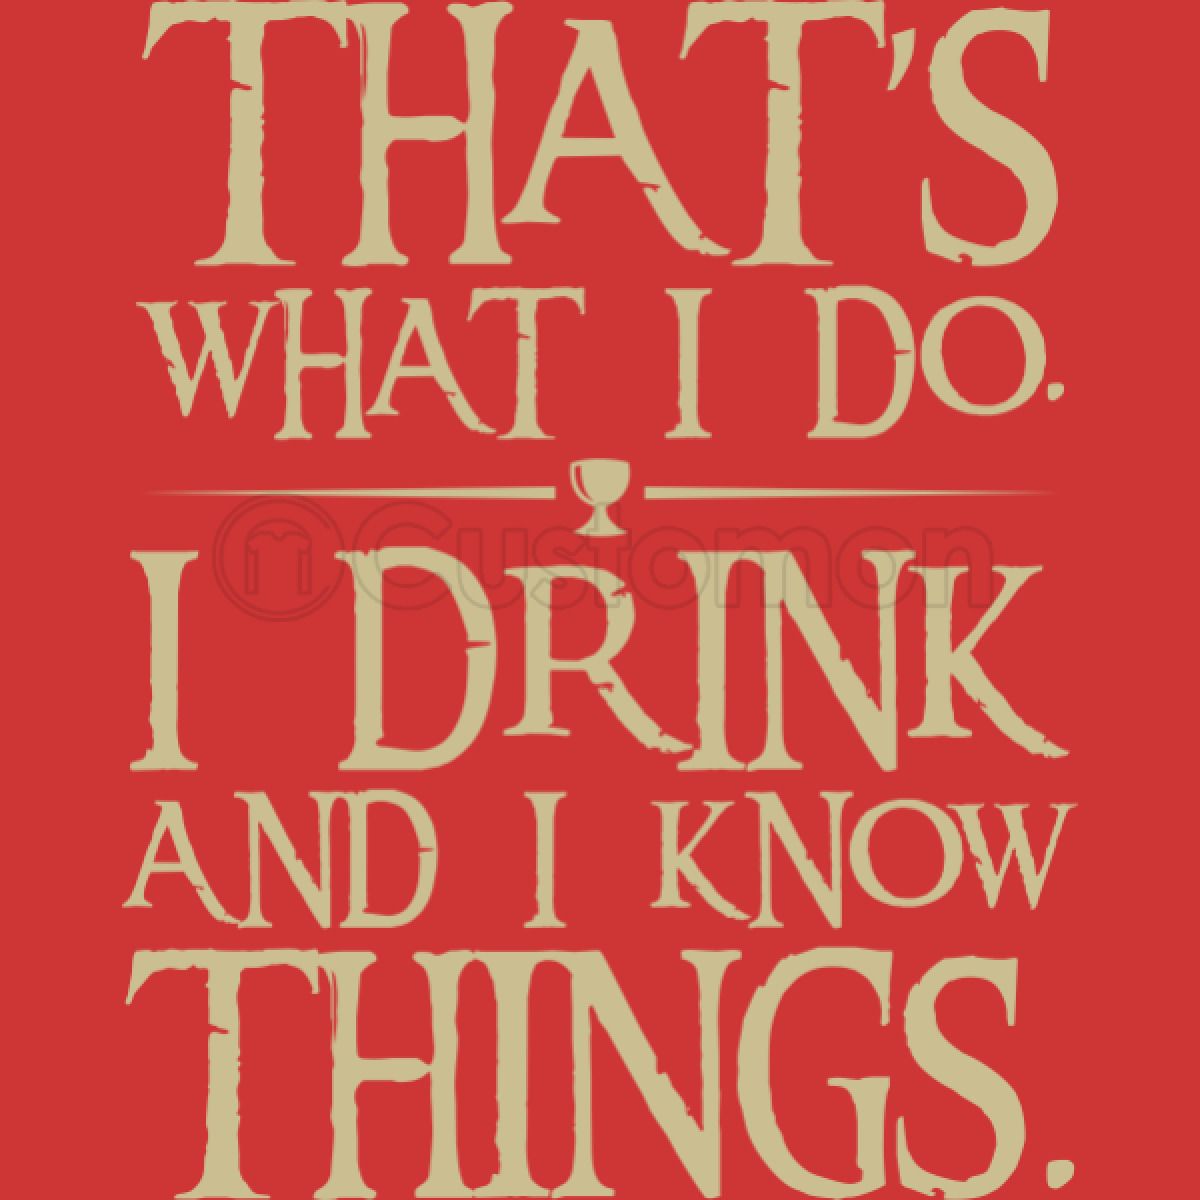 I Drink And I Know Things Quote : That's what I do - I drink and I know ...